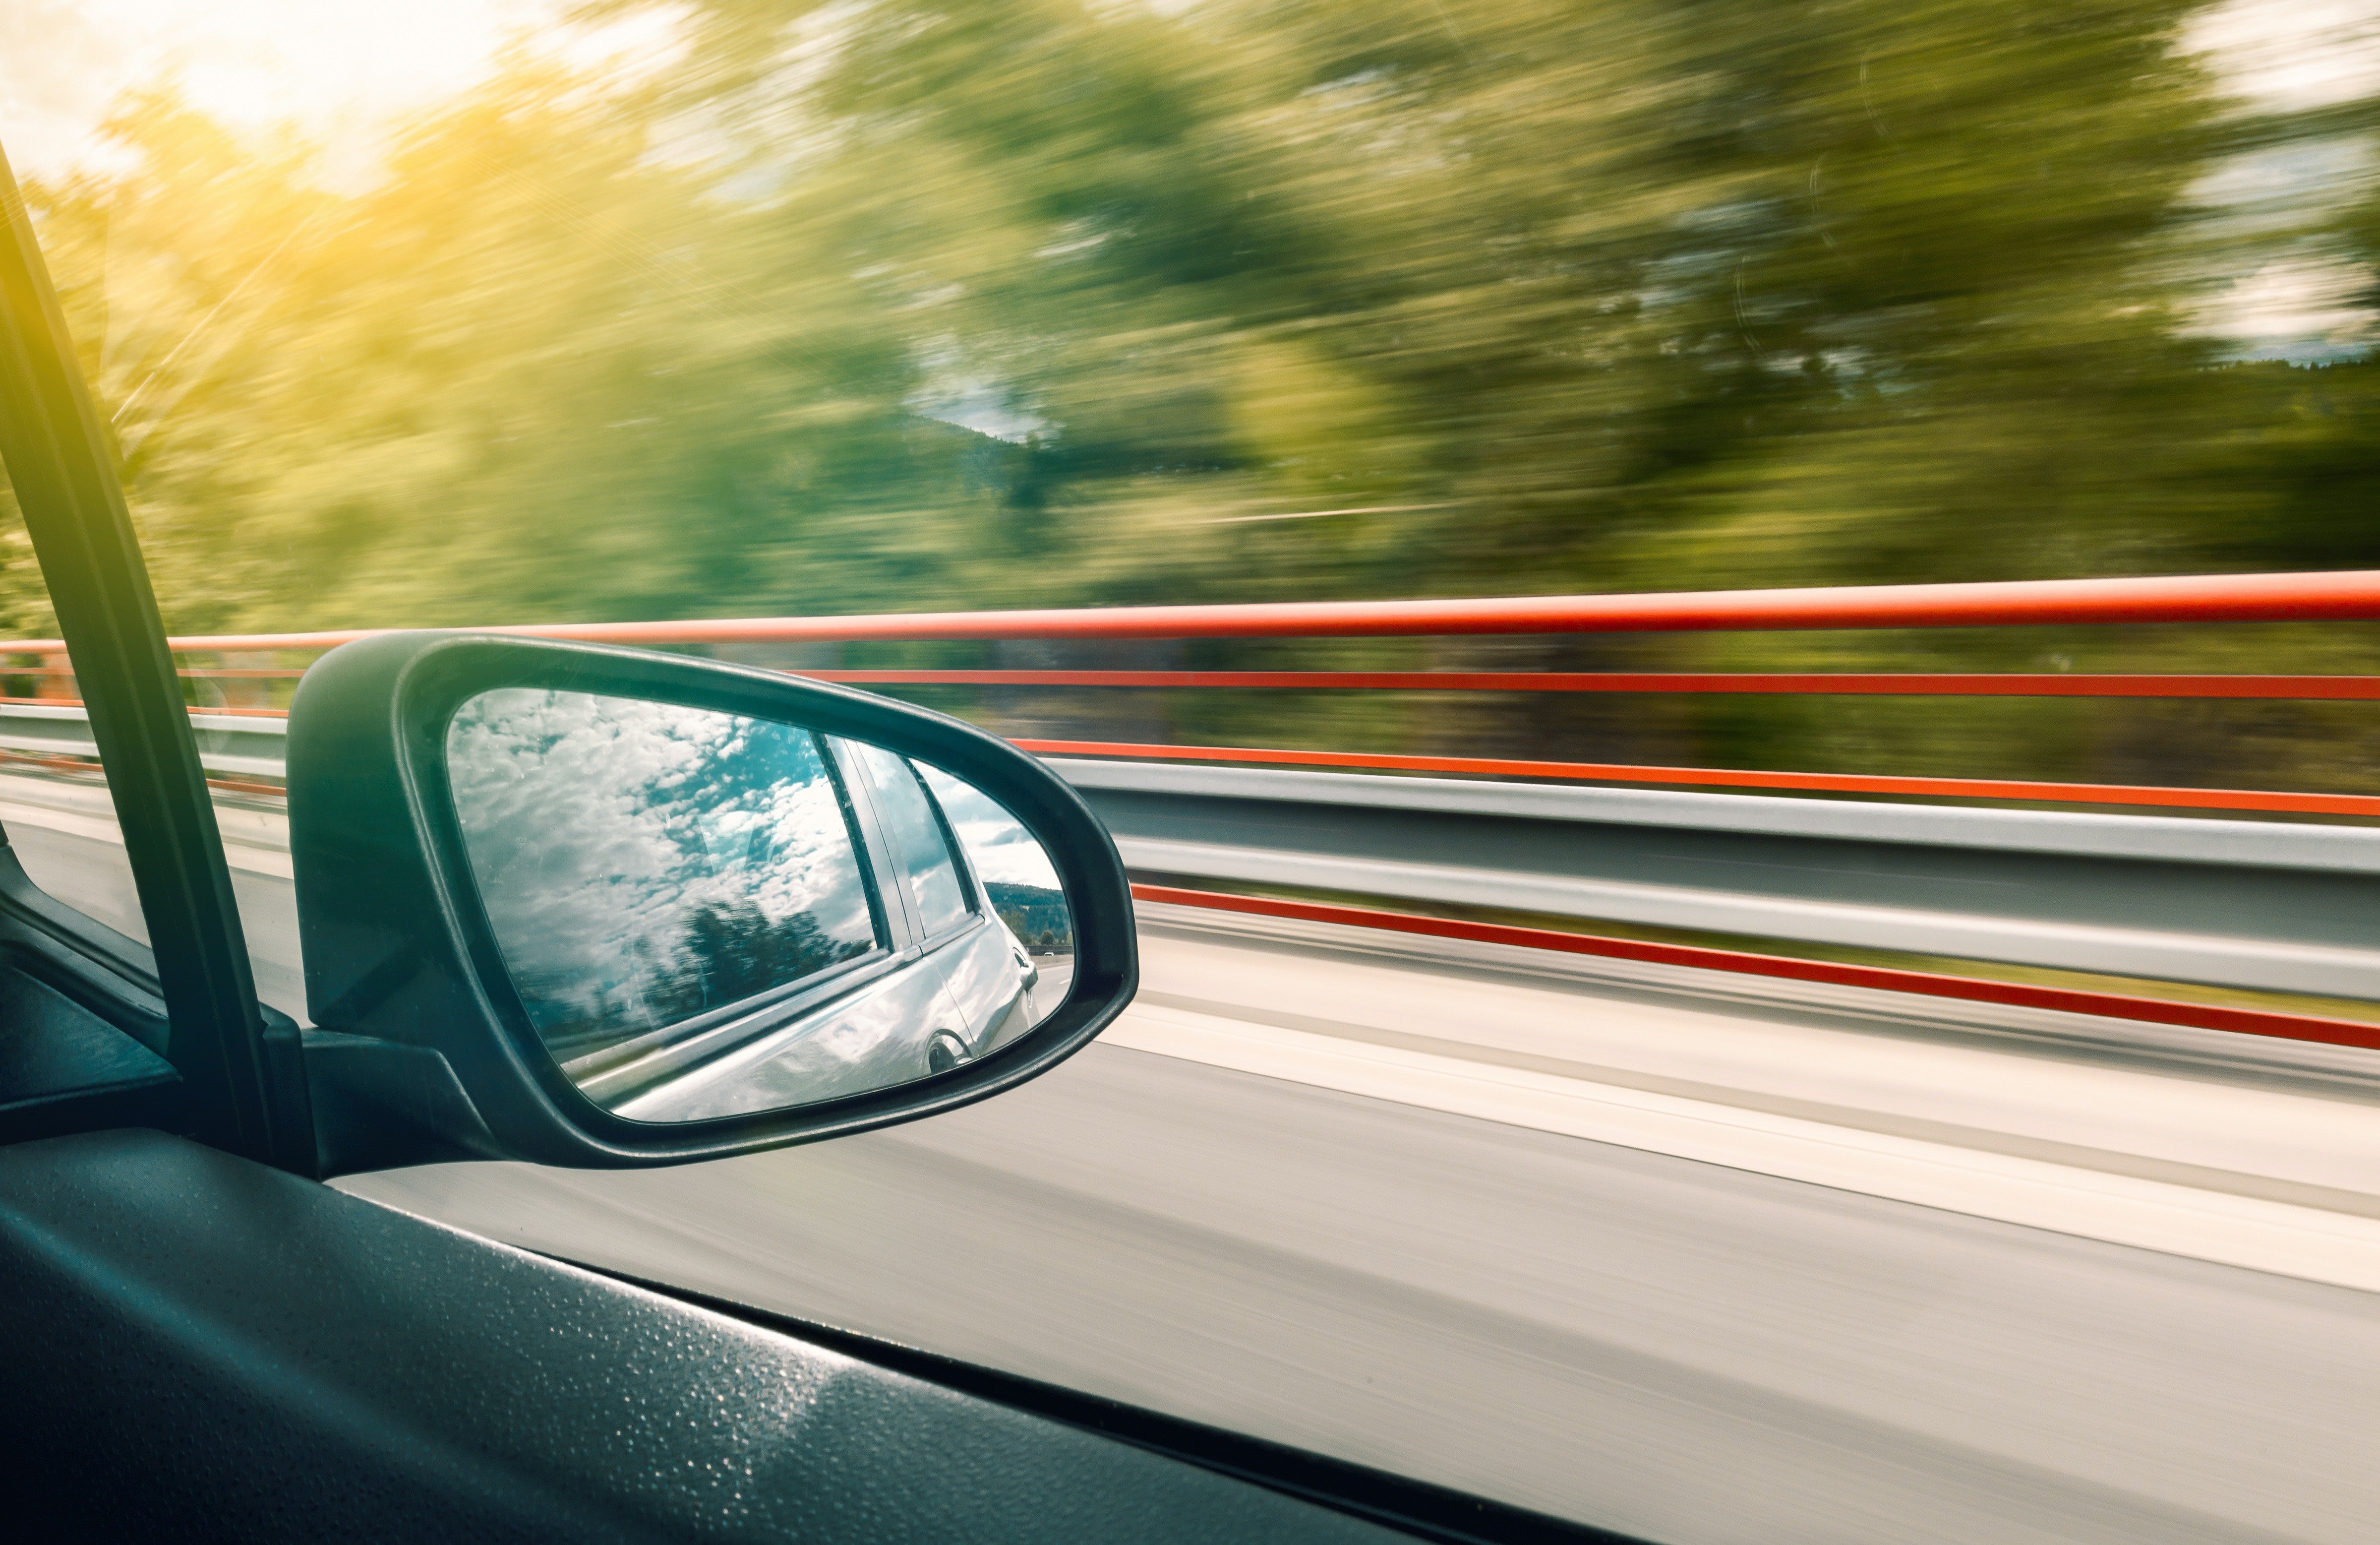 A car's side mirror is shown as the car drives down a forested highway